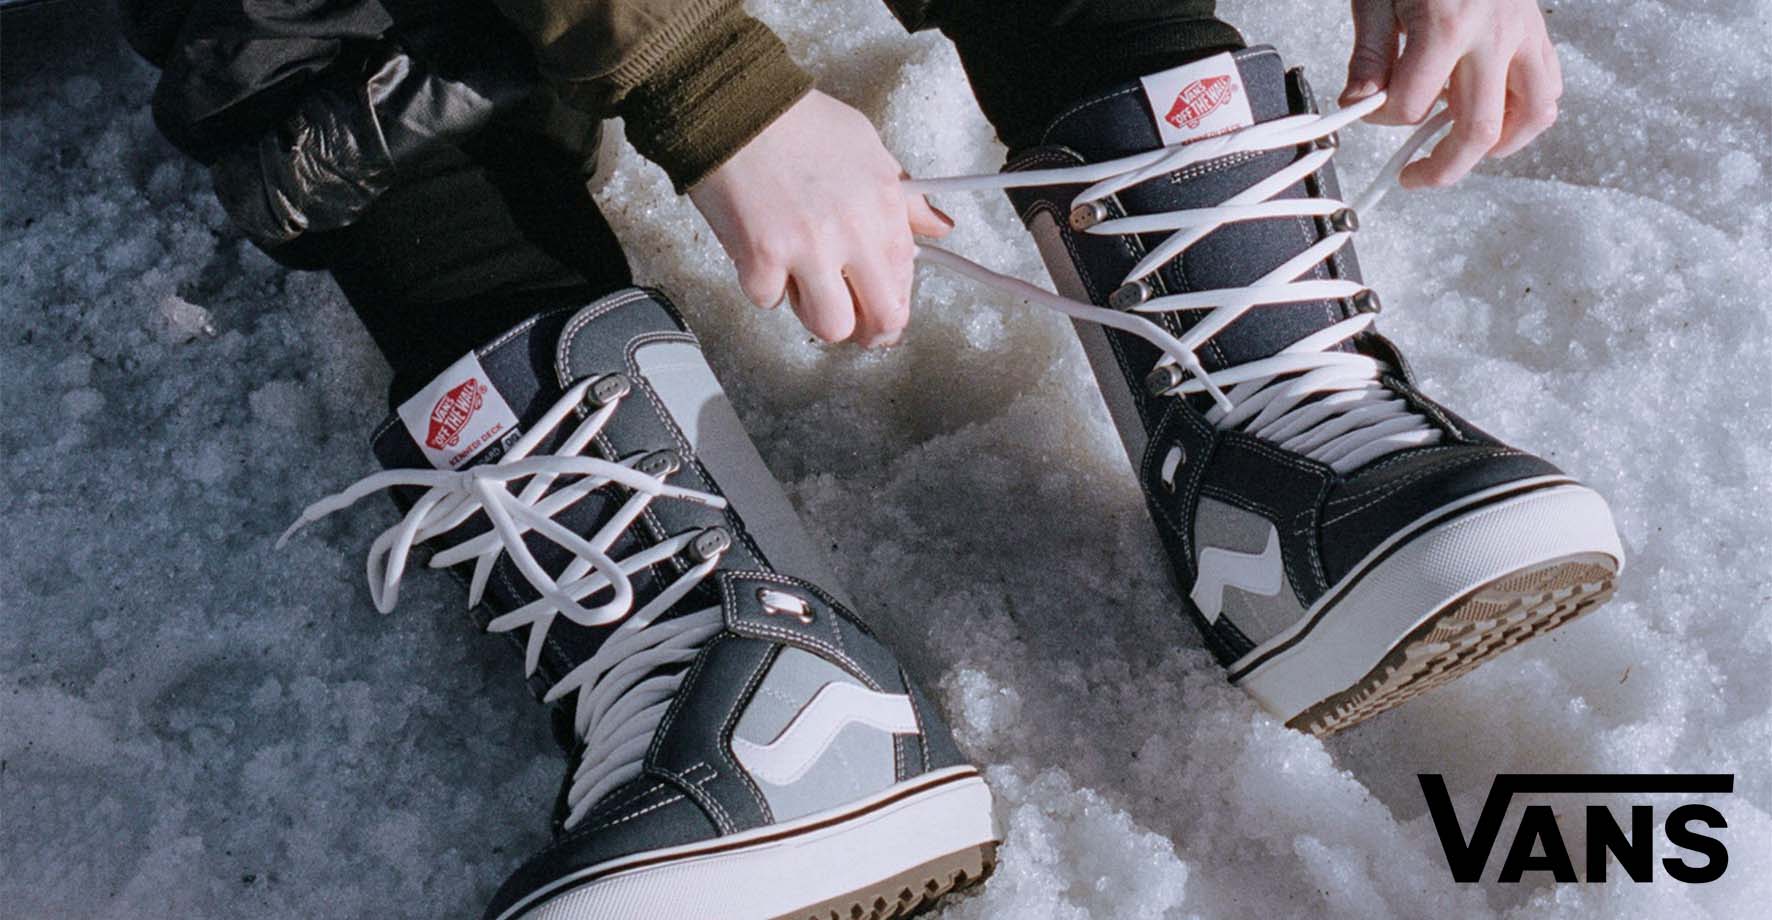 Vans - Ready-to-Wear Clothing and Snowboard Boots – Oberson